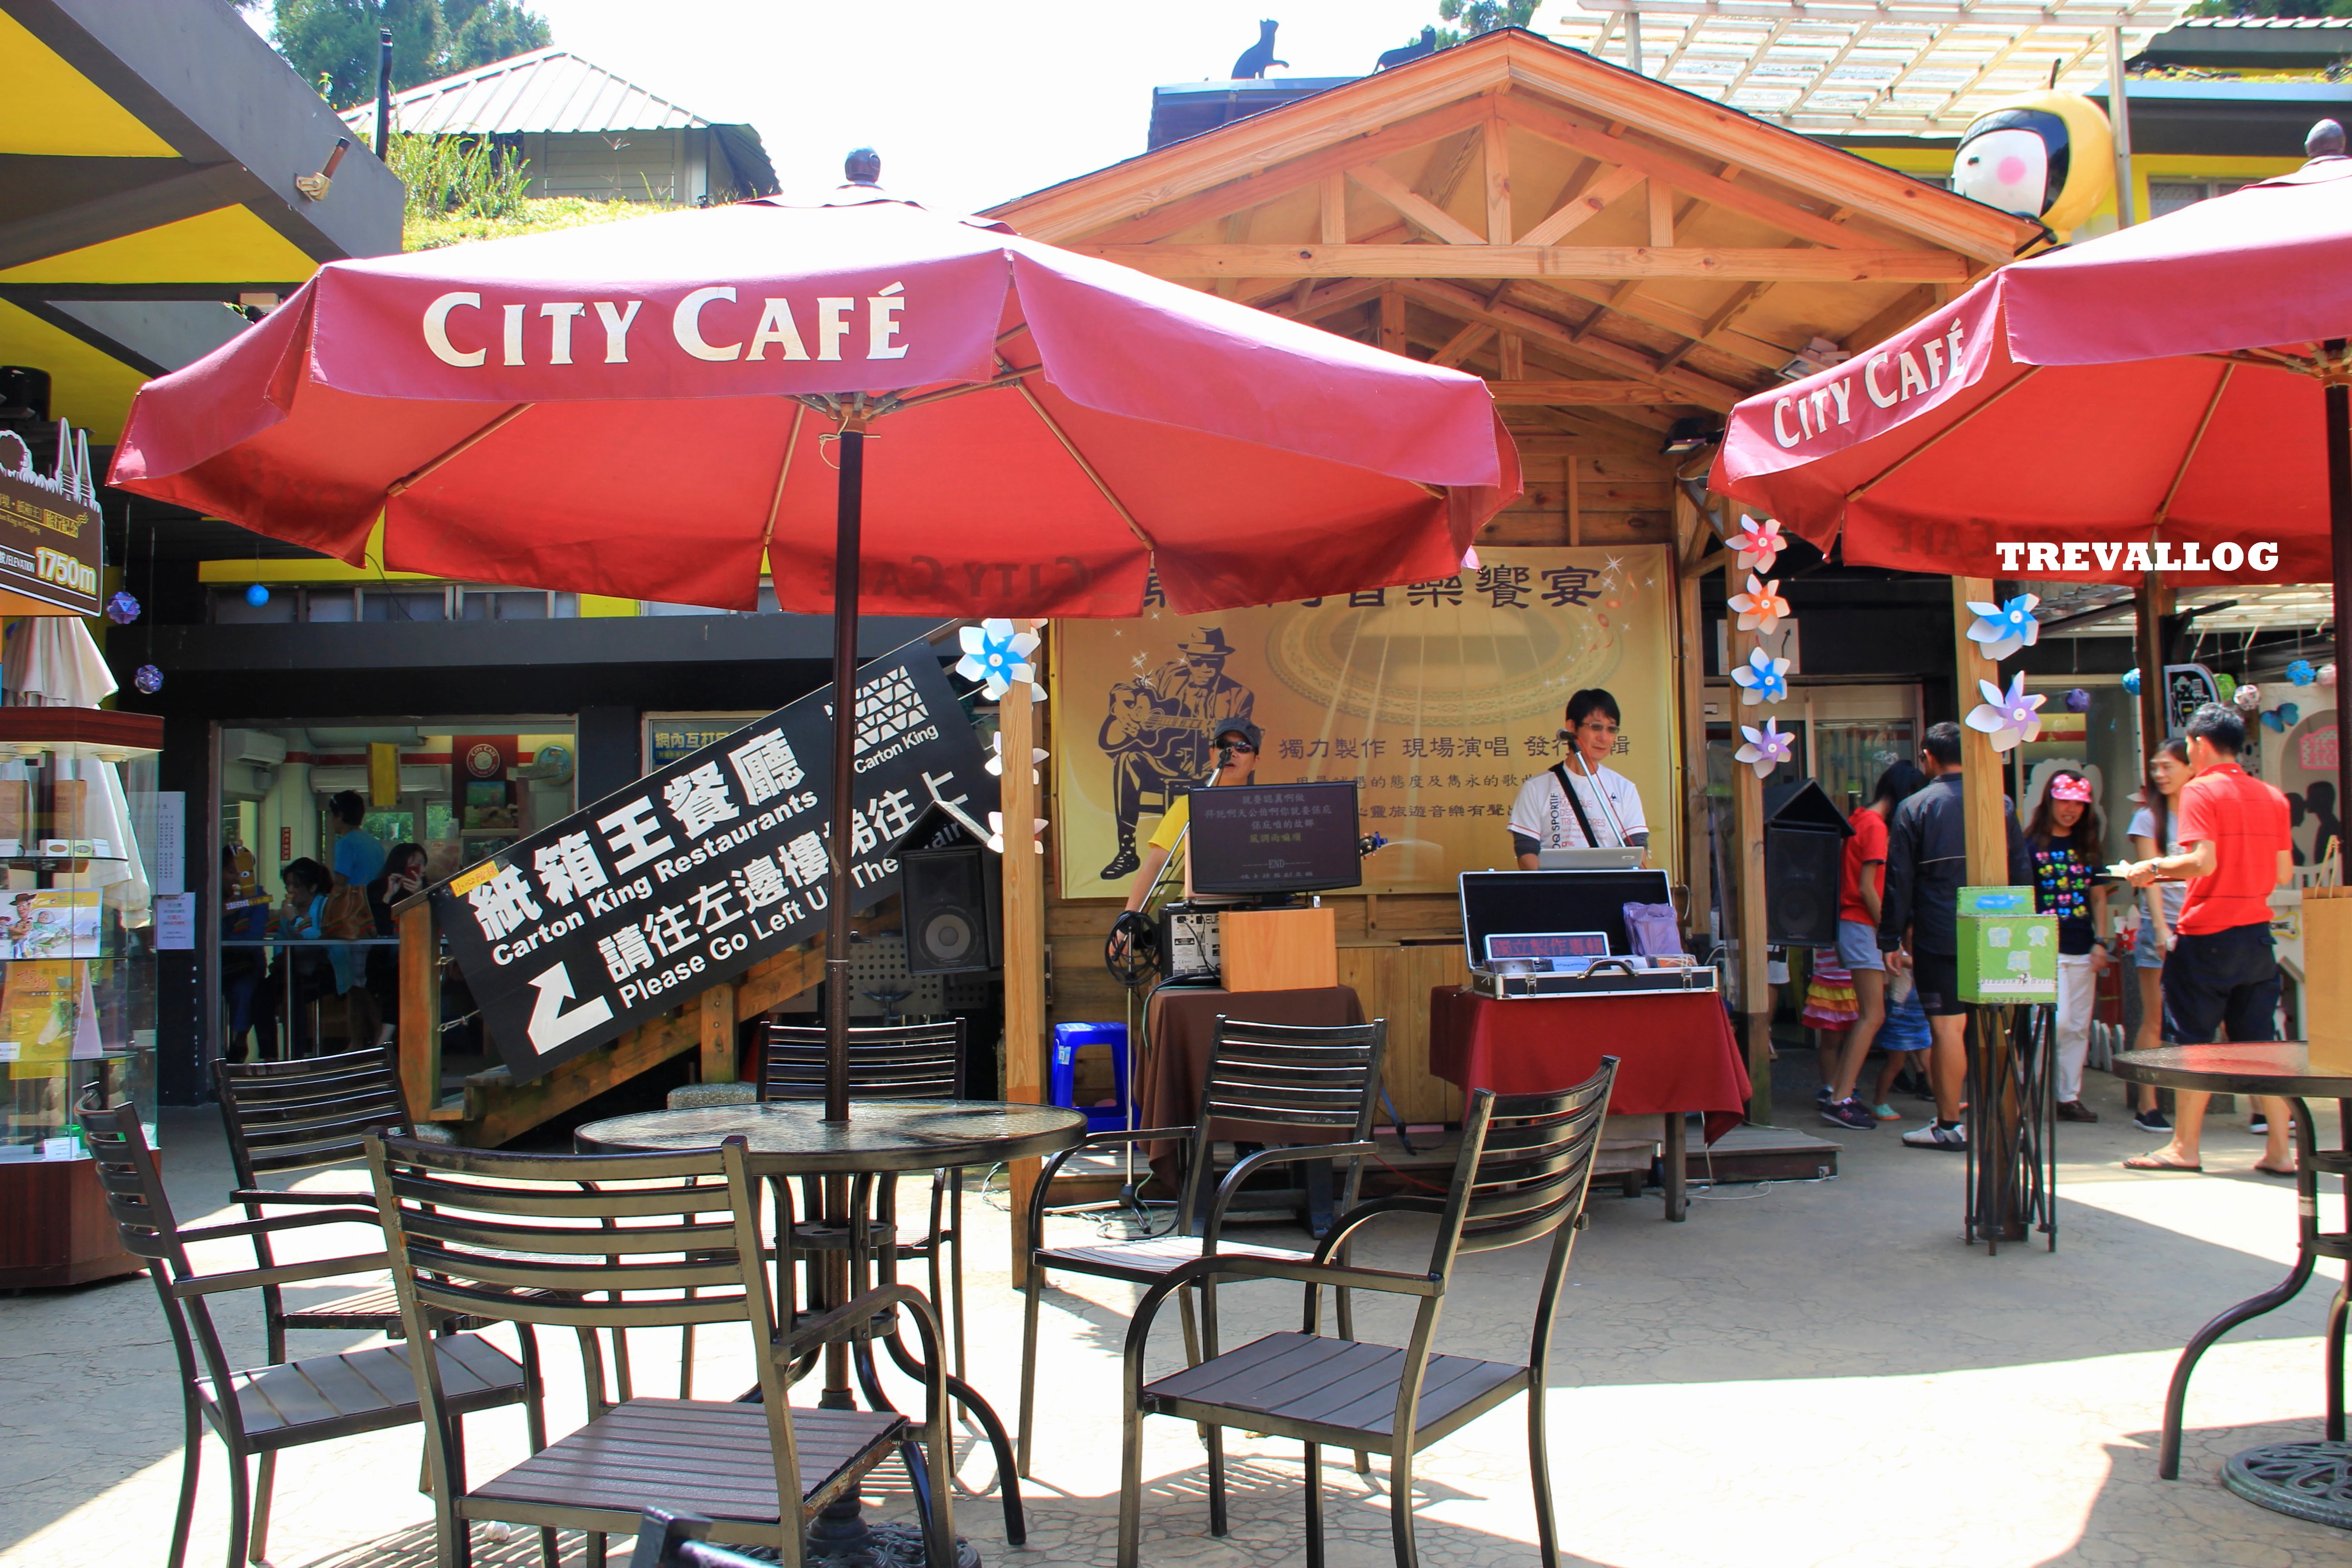 City Cafe in front of Little Swiss Garden where we had our bento lunch, accompanied by live performance